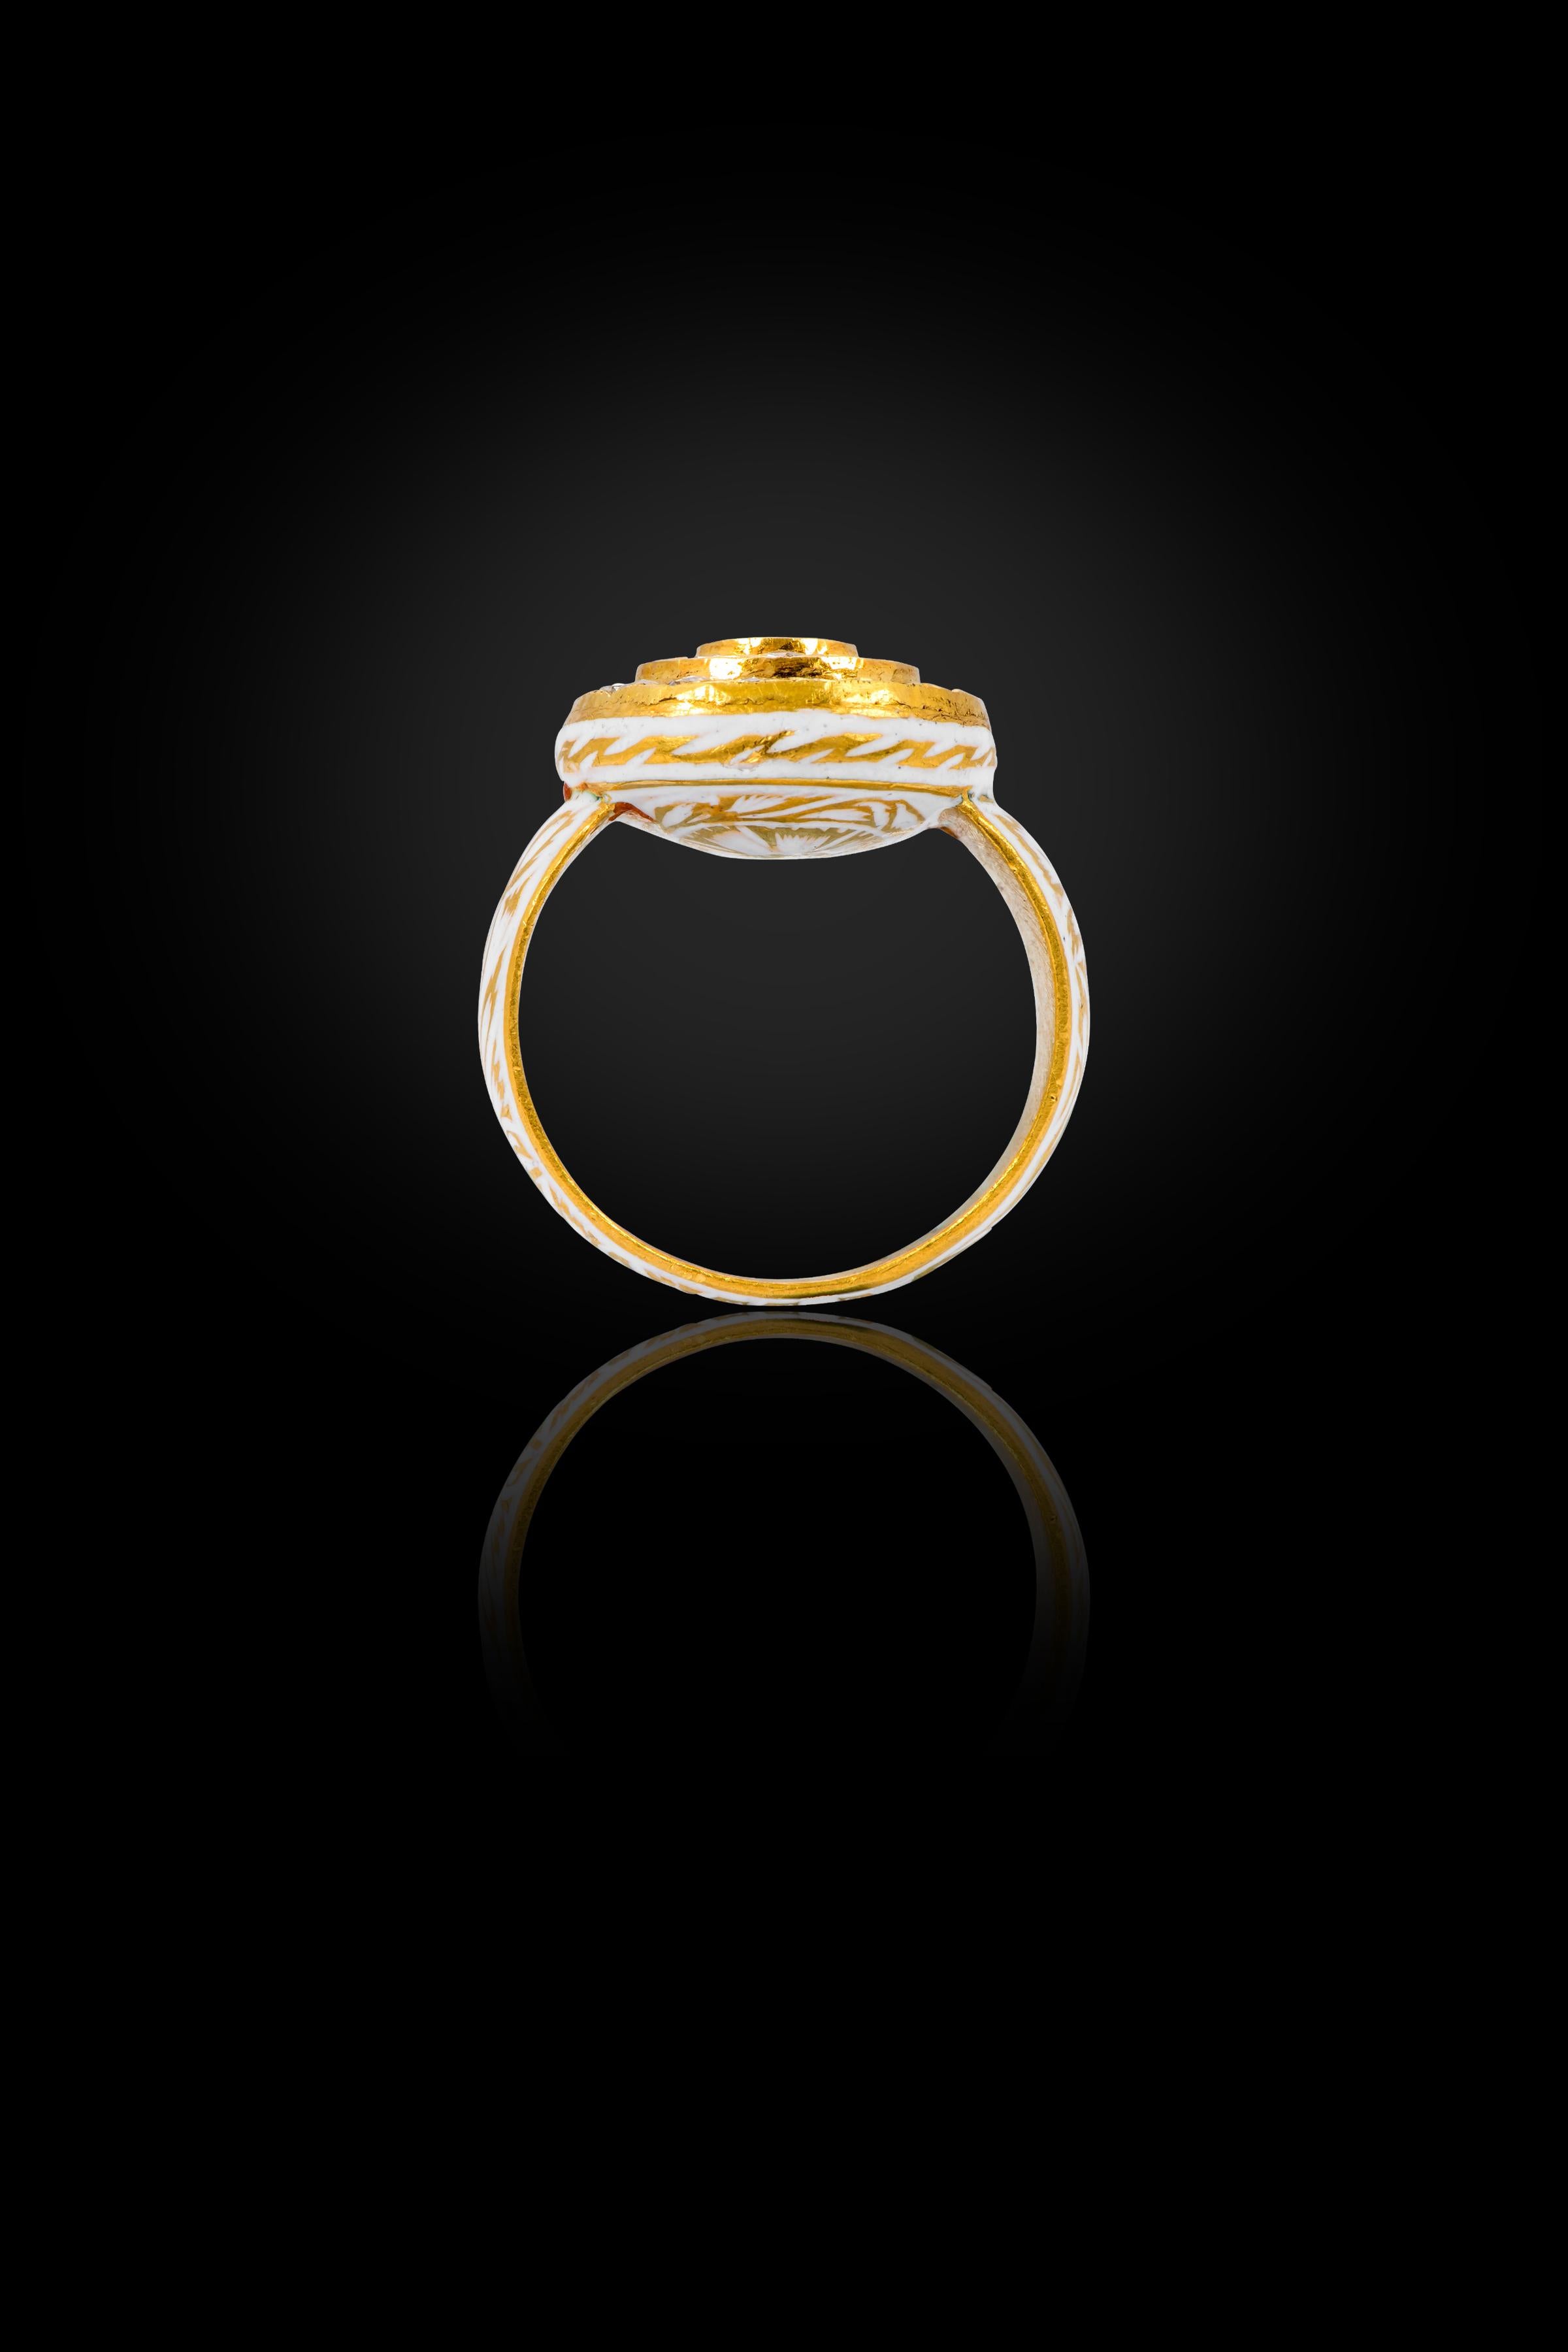 22 Karat Gold Rose-Cut Diamond Ring Handcrafted with White Enamel Work  For Sale 1